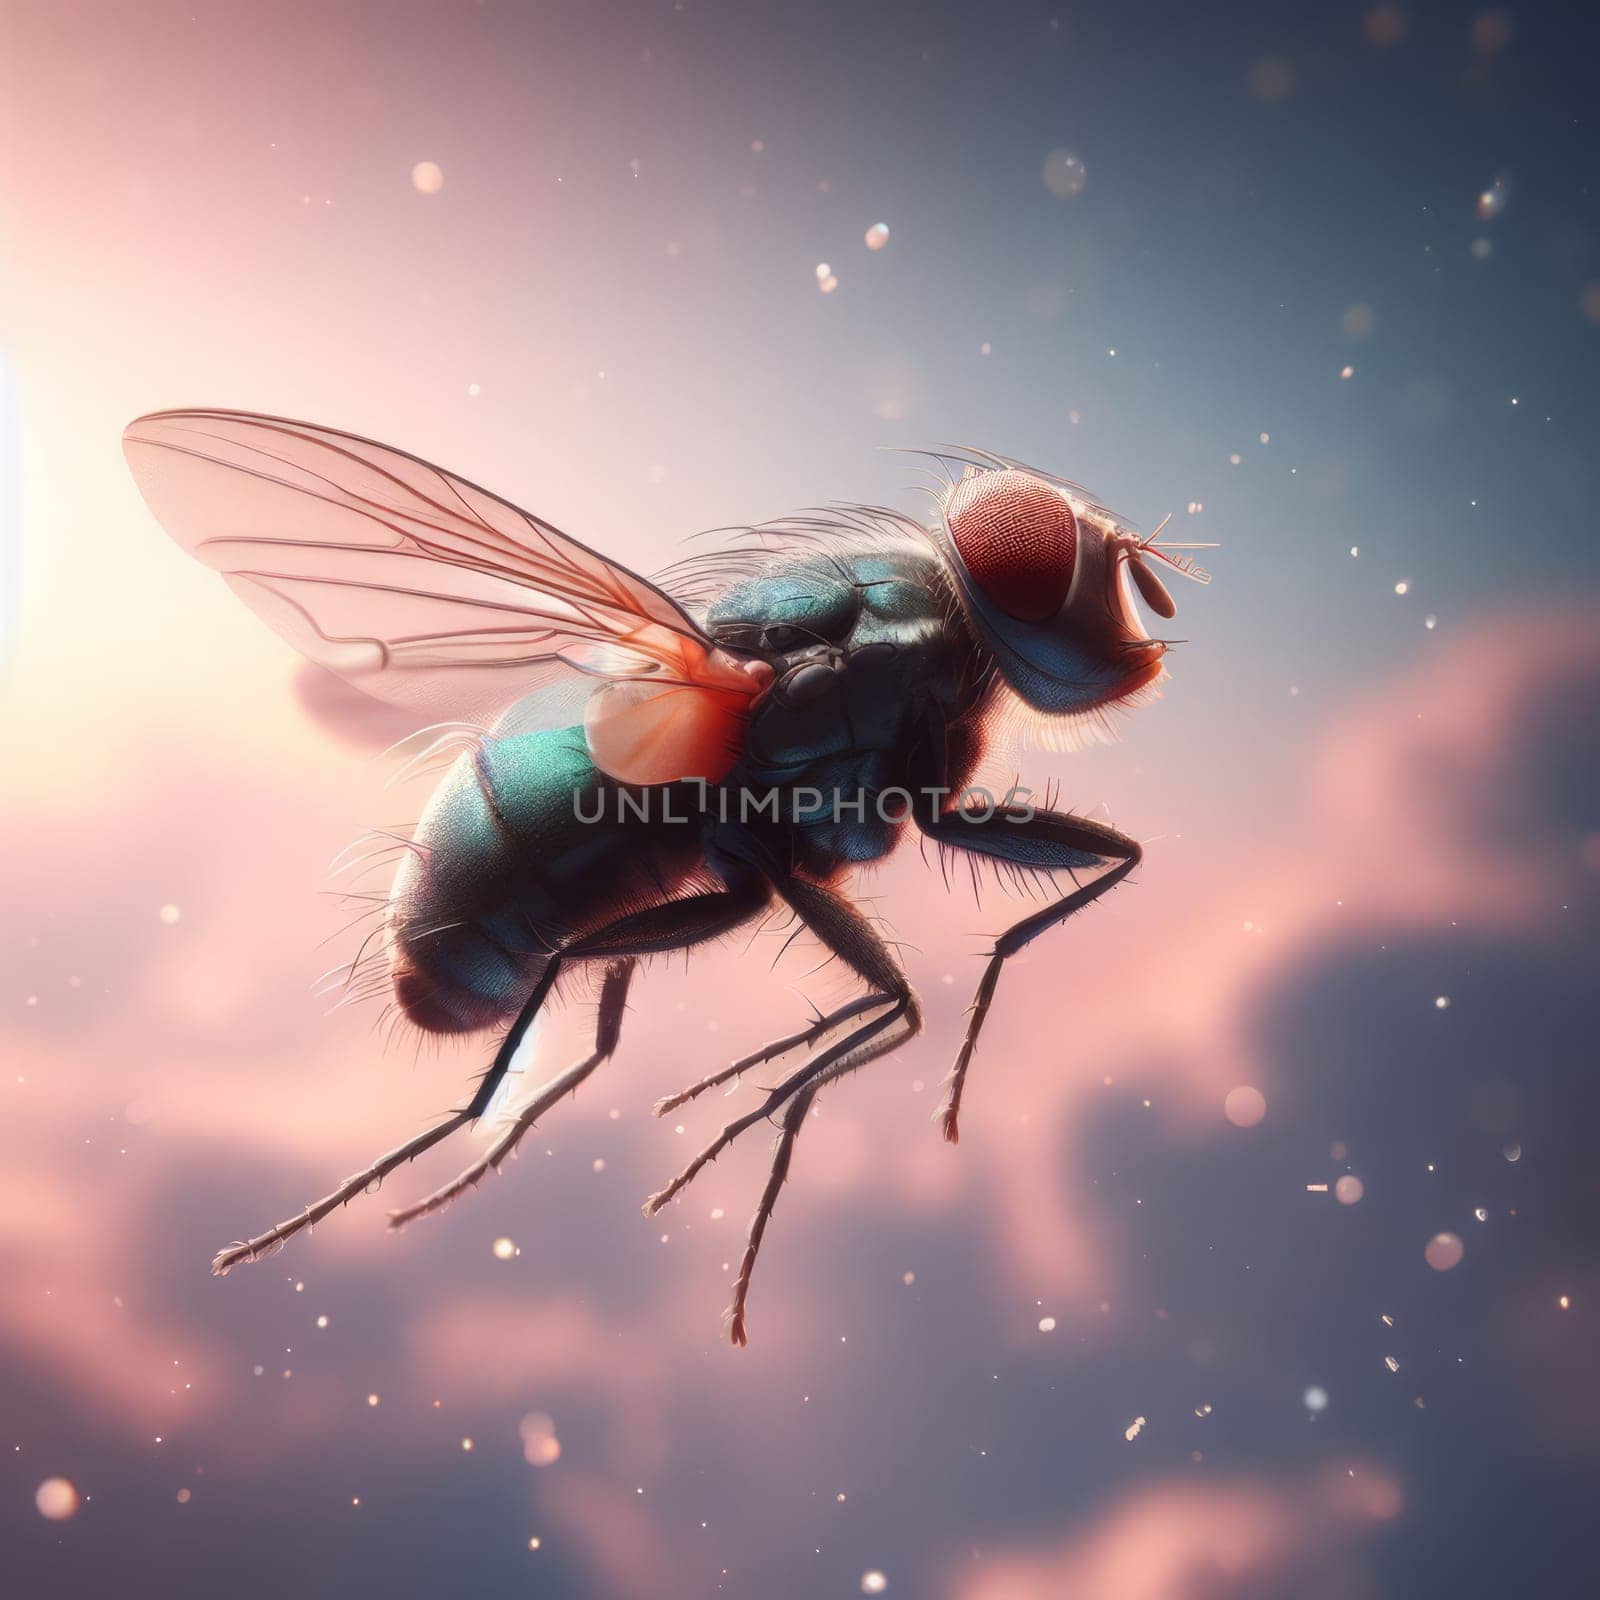 Close-up of a fly with detailed textures, against a soft-focused cloudy sky during sunset